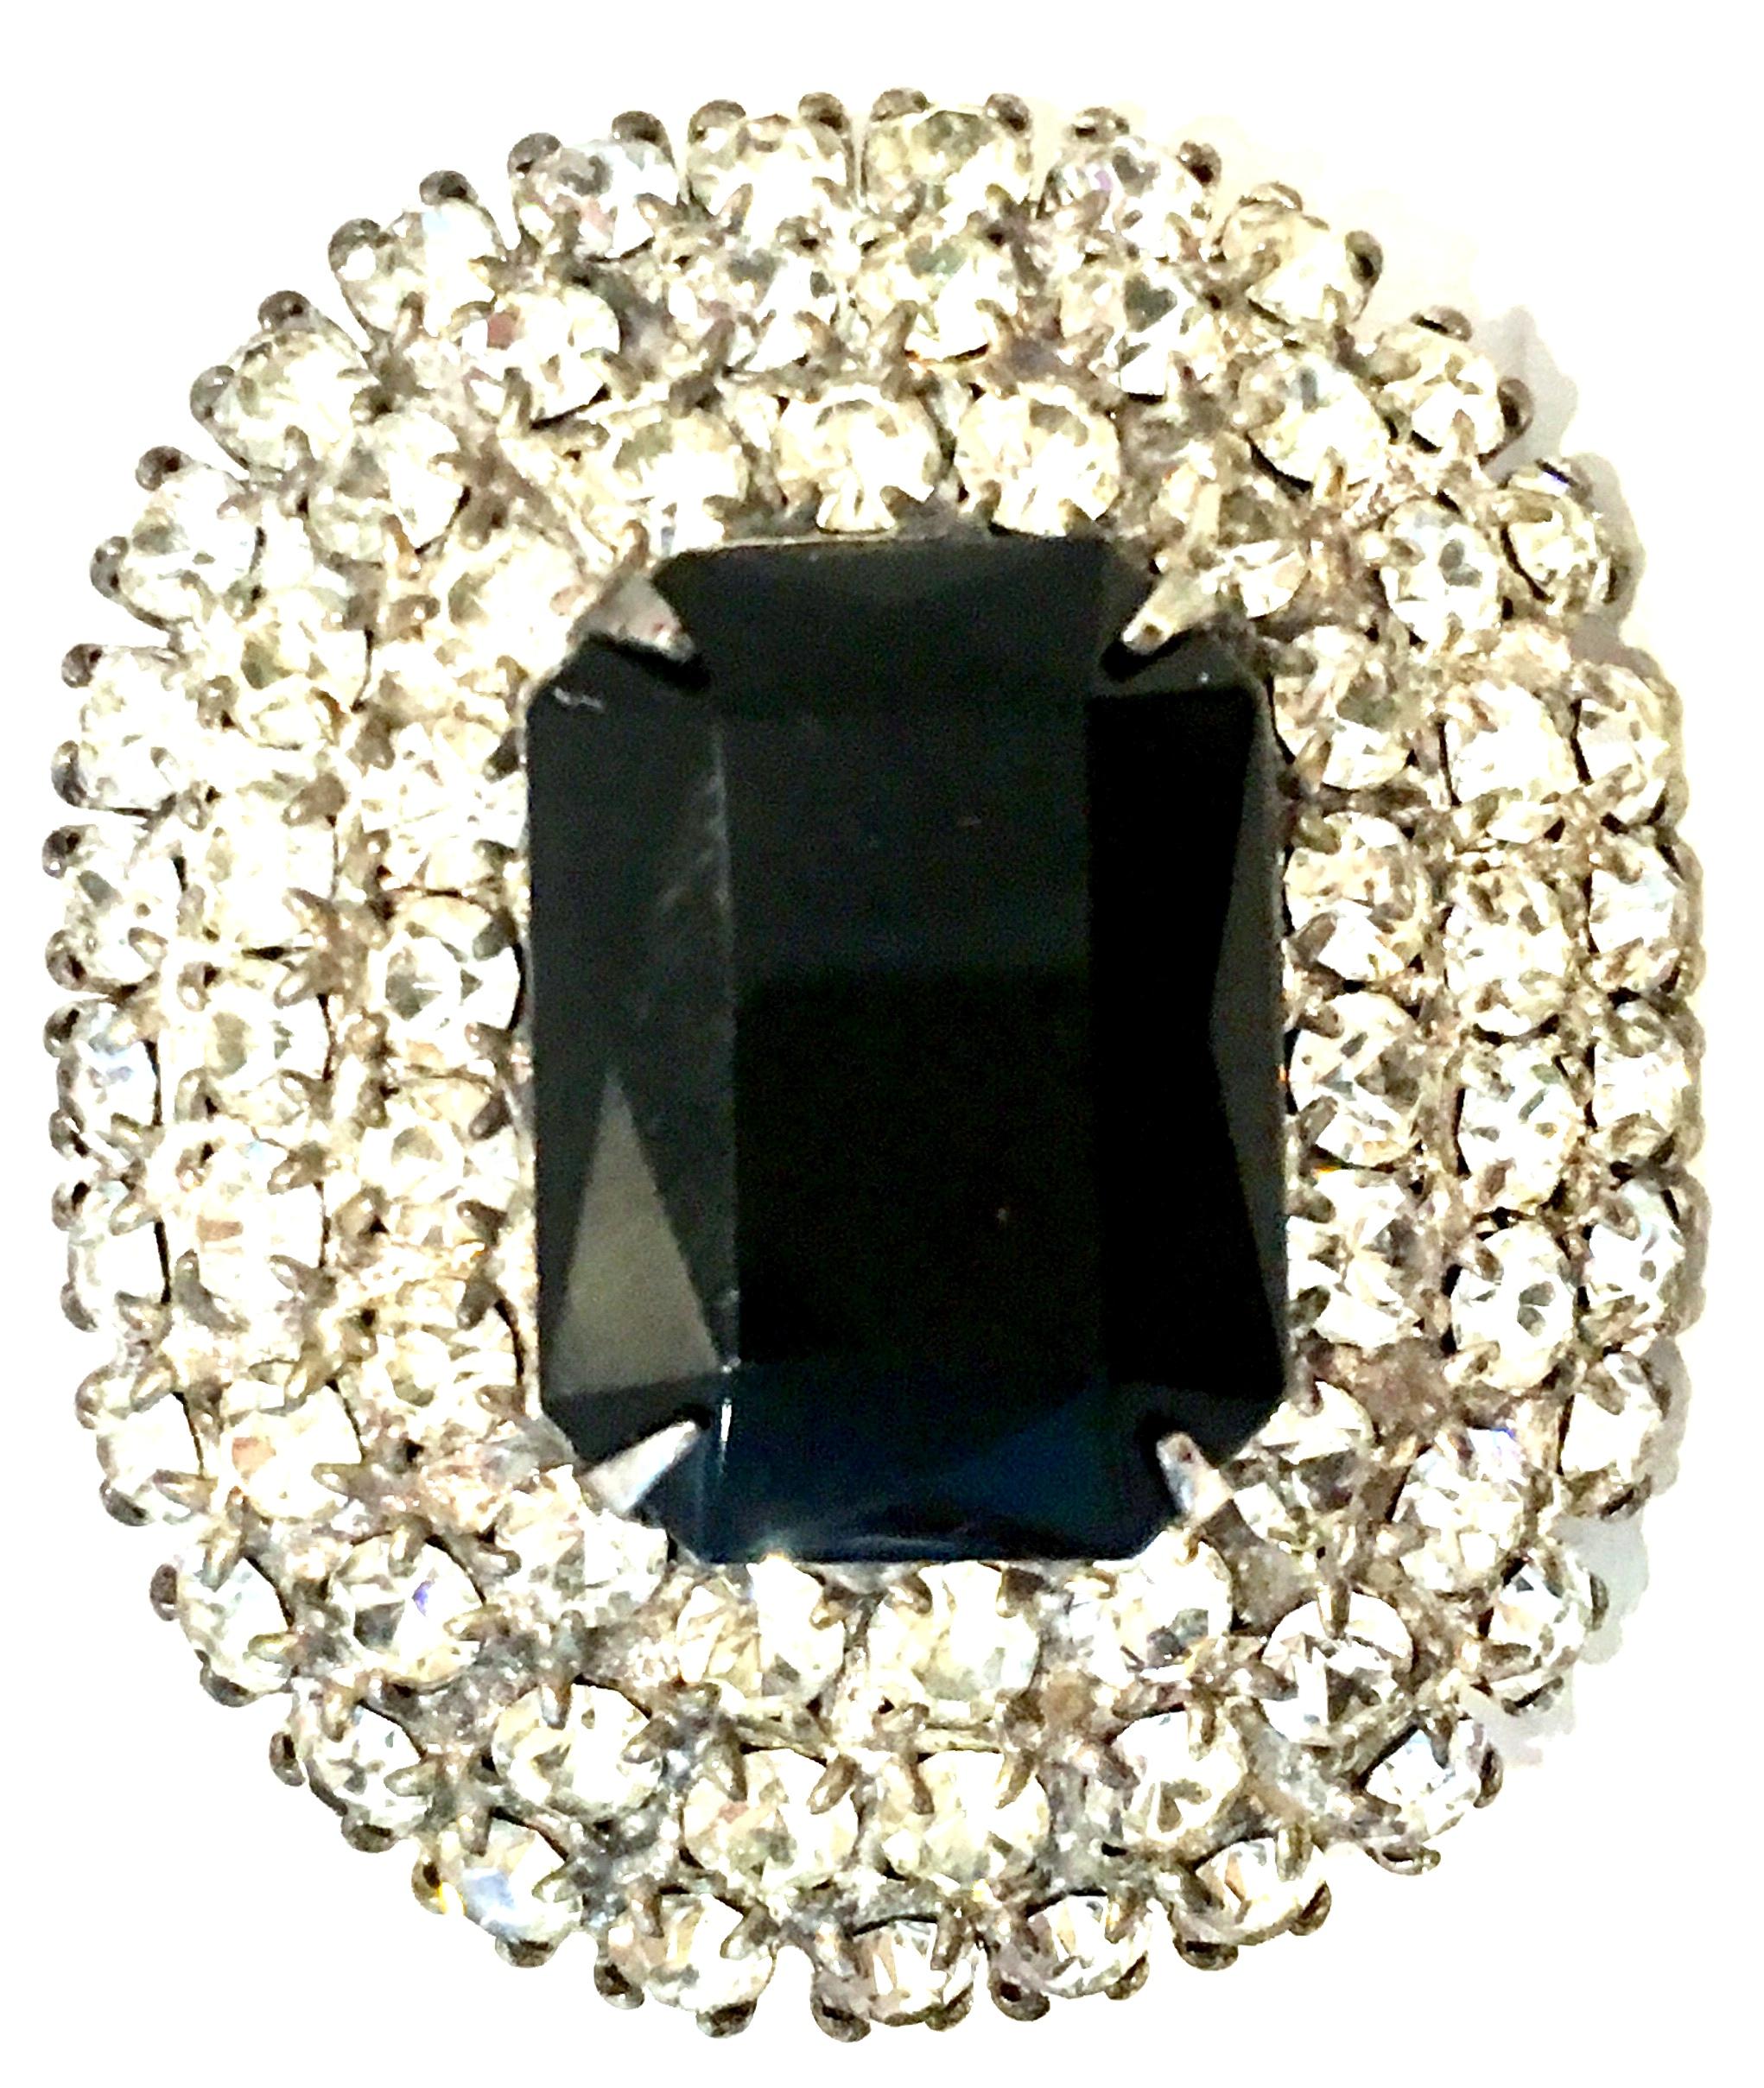 20th Century Silver Plate & Austrian Crystal Dimensional Brooch. This dramatic, classic and timeless brooch features silver plate prong set stones with a large central brilliant black cut and faceted emerald cut stone measuring approximately, .75